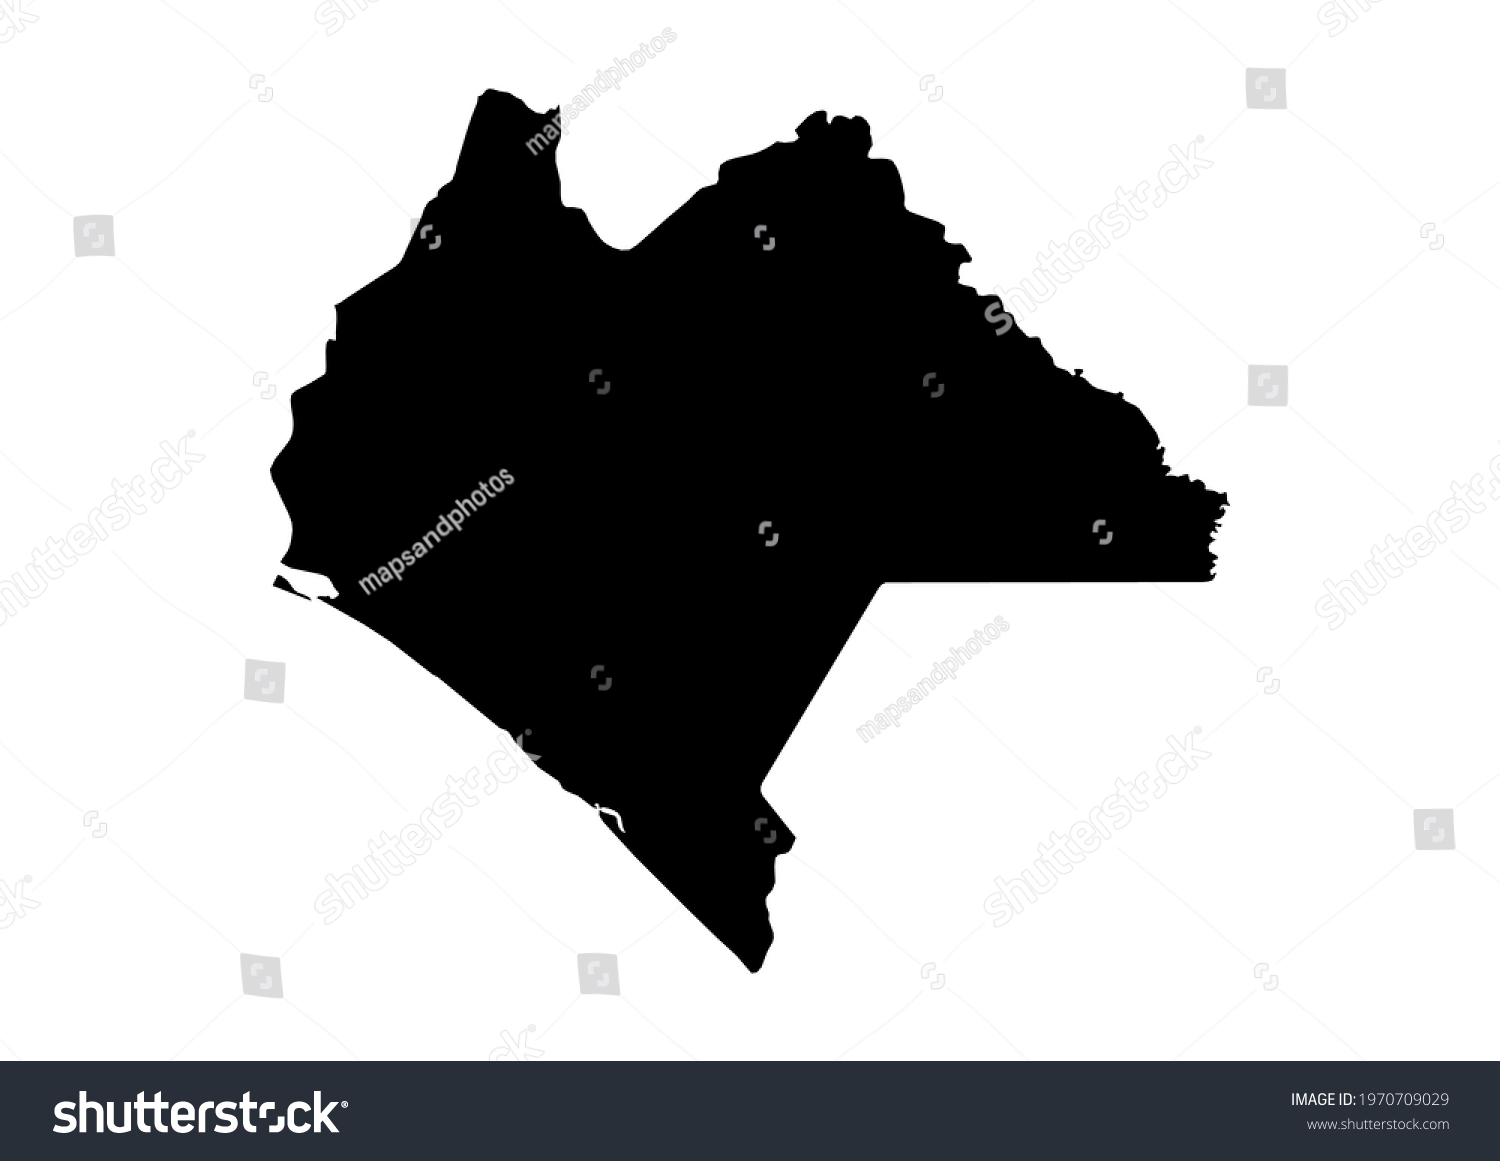 Fully Editable Detailed Vector Map Of Chiapas Royalty Free Stock Vector 1970709029 8552